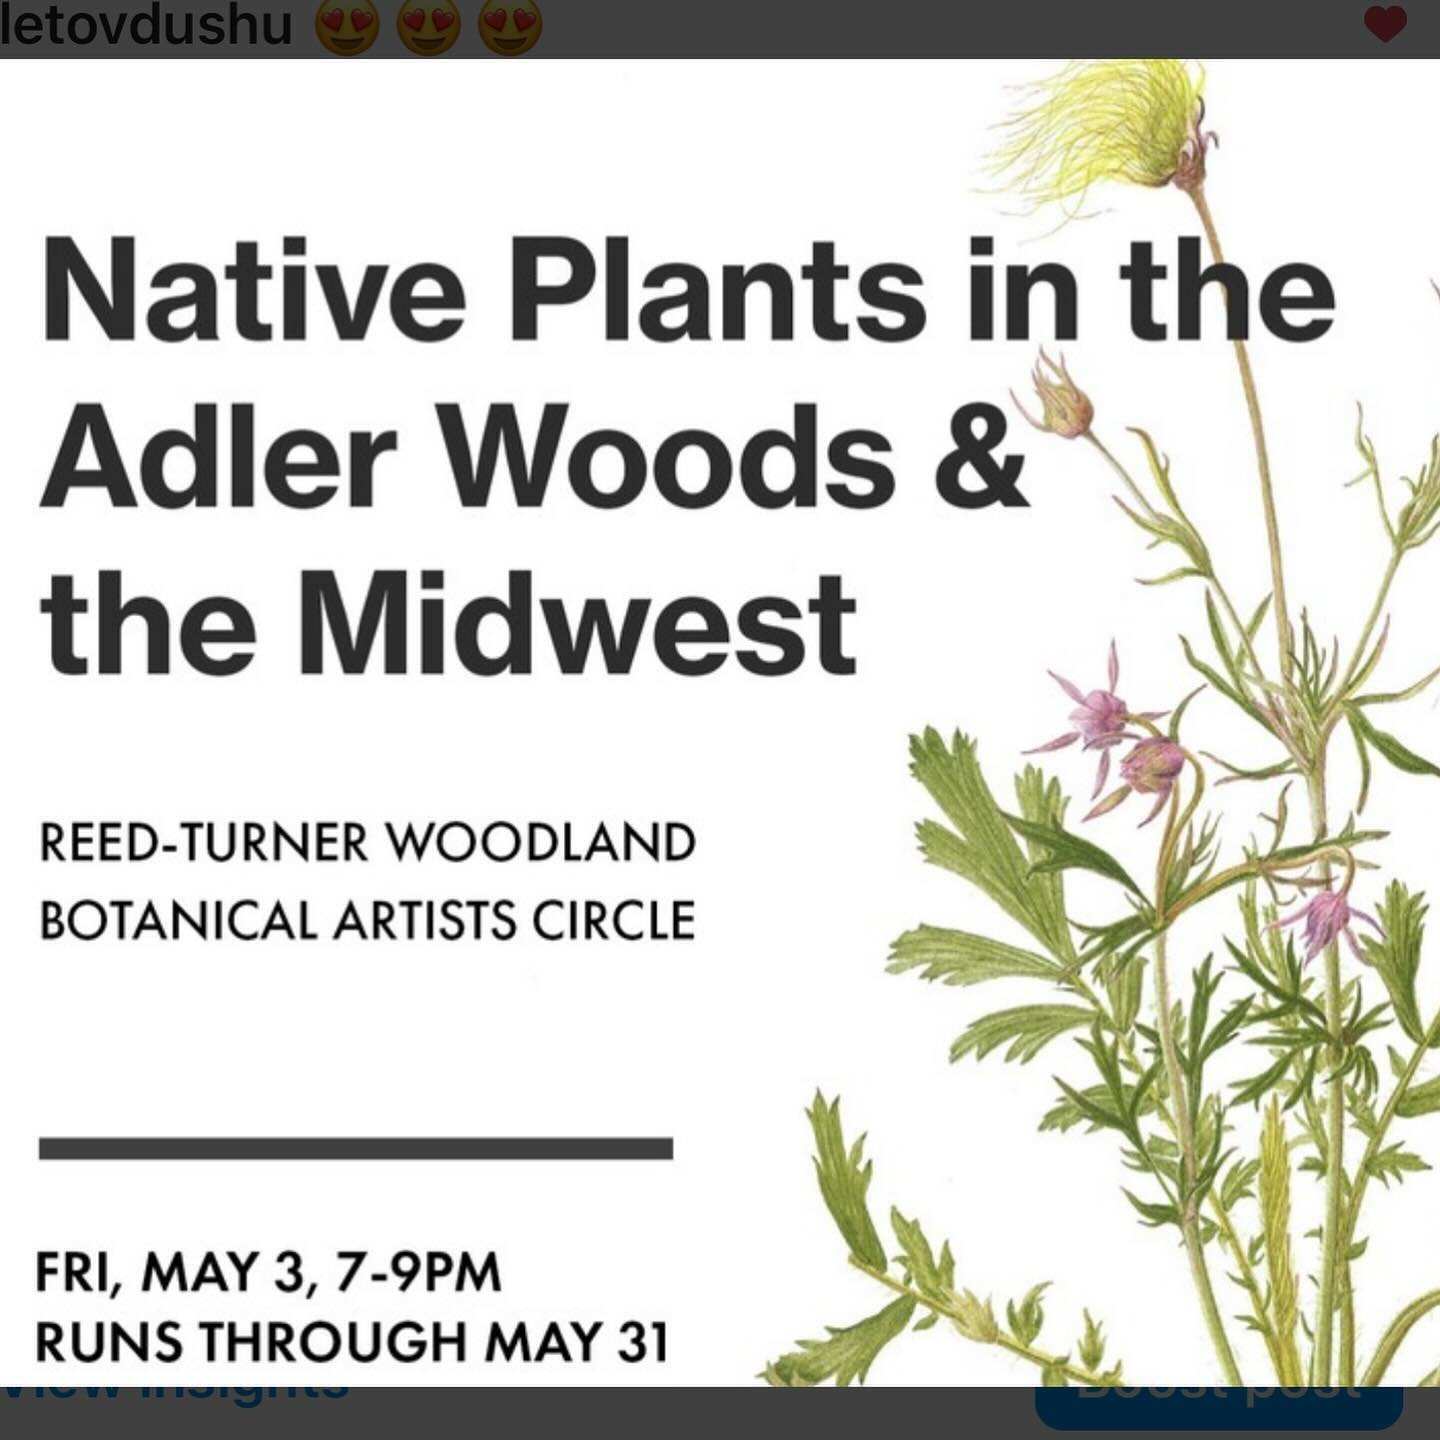 Opening reception, today! 7 pm -9 pm 
At Adler Arts Center 
1700 N Milwaukee Ave, Libertyville, IL
Art exhibition by Reed-Turner Botanical Artists. 

The group meets at Reed-Turner Nature Preserve in Long Grove every month and actively exhibits with 